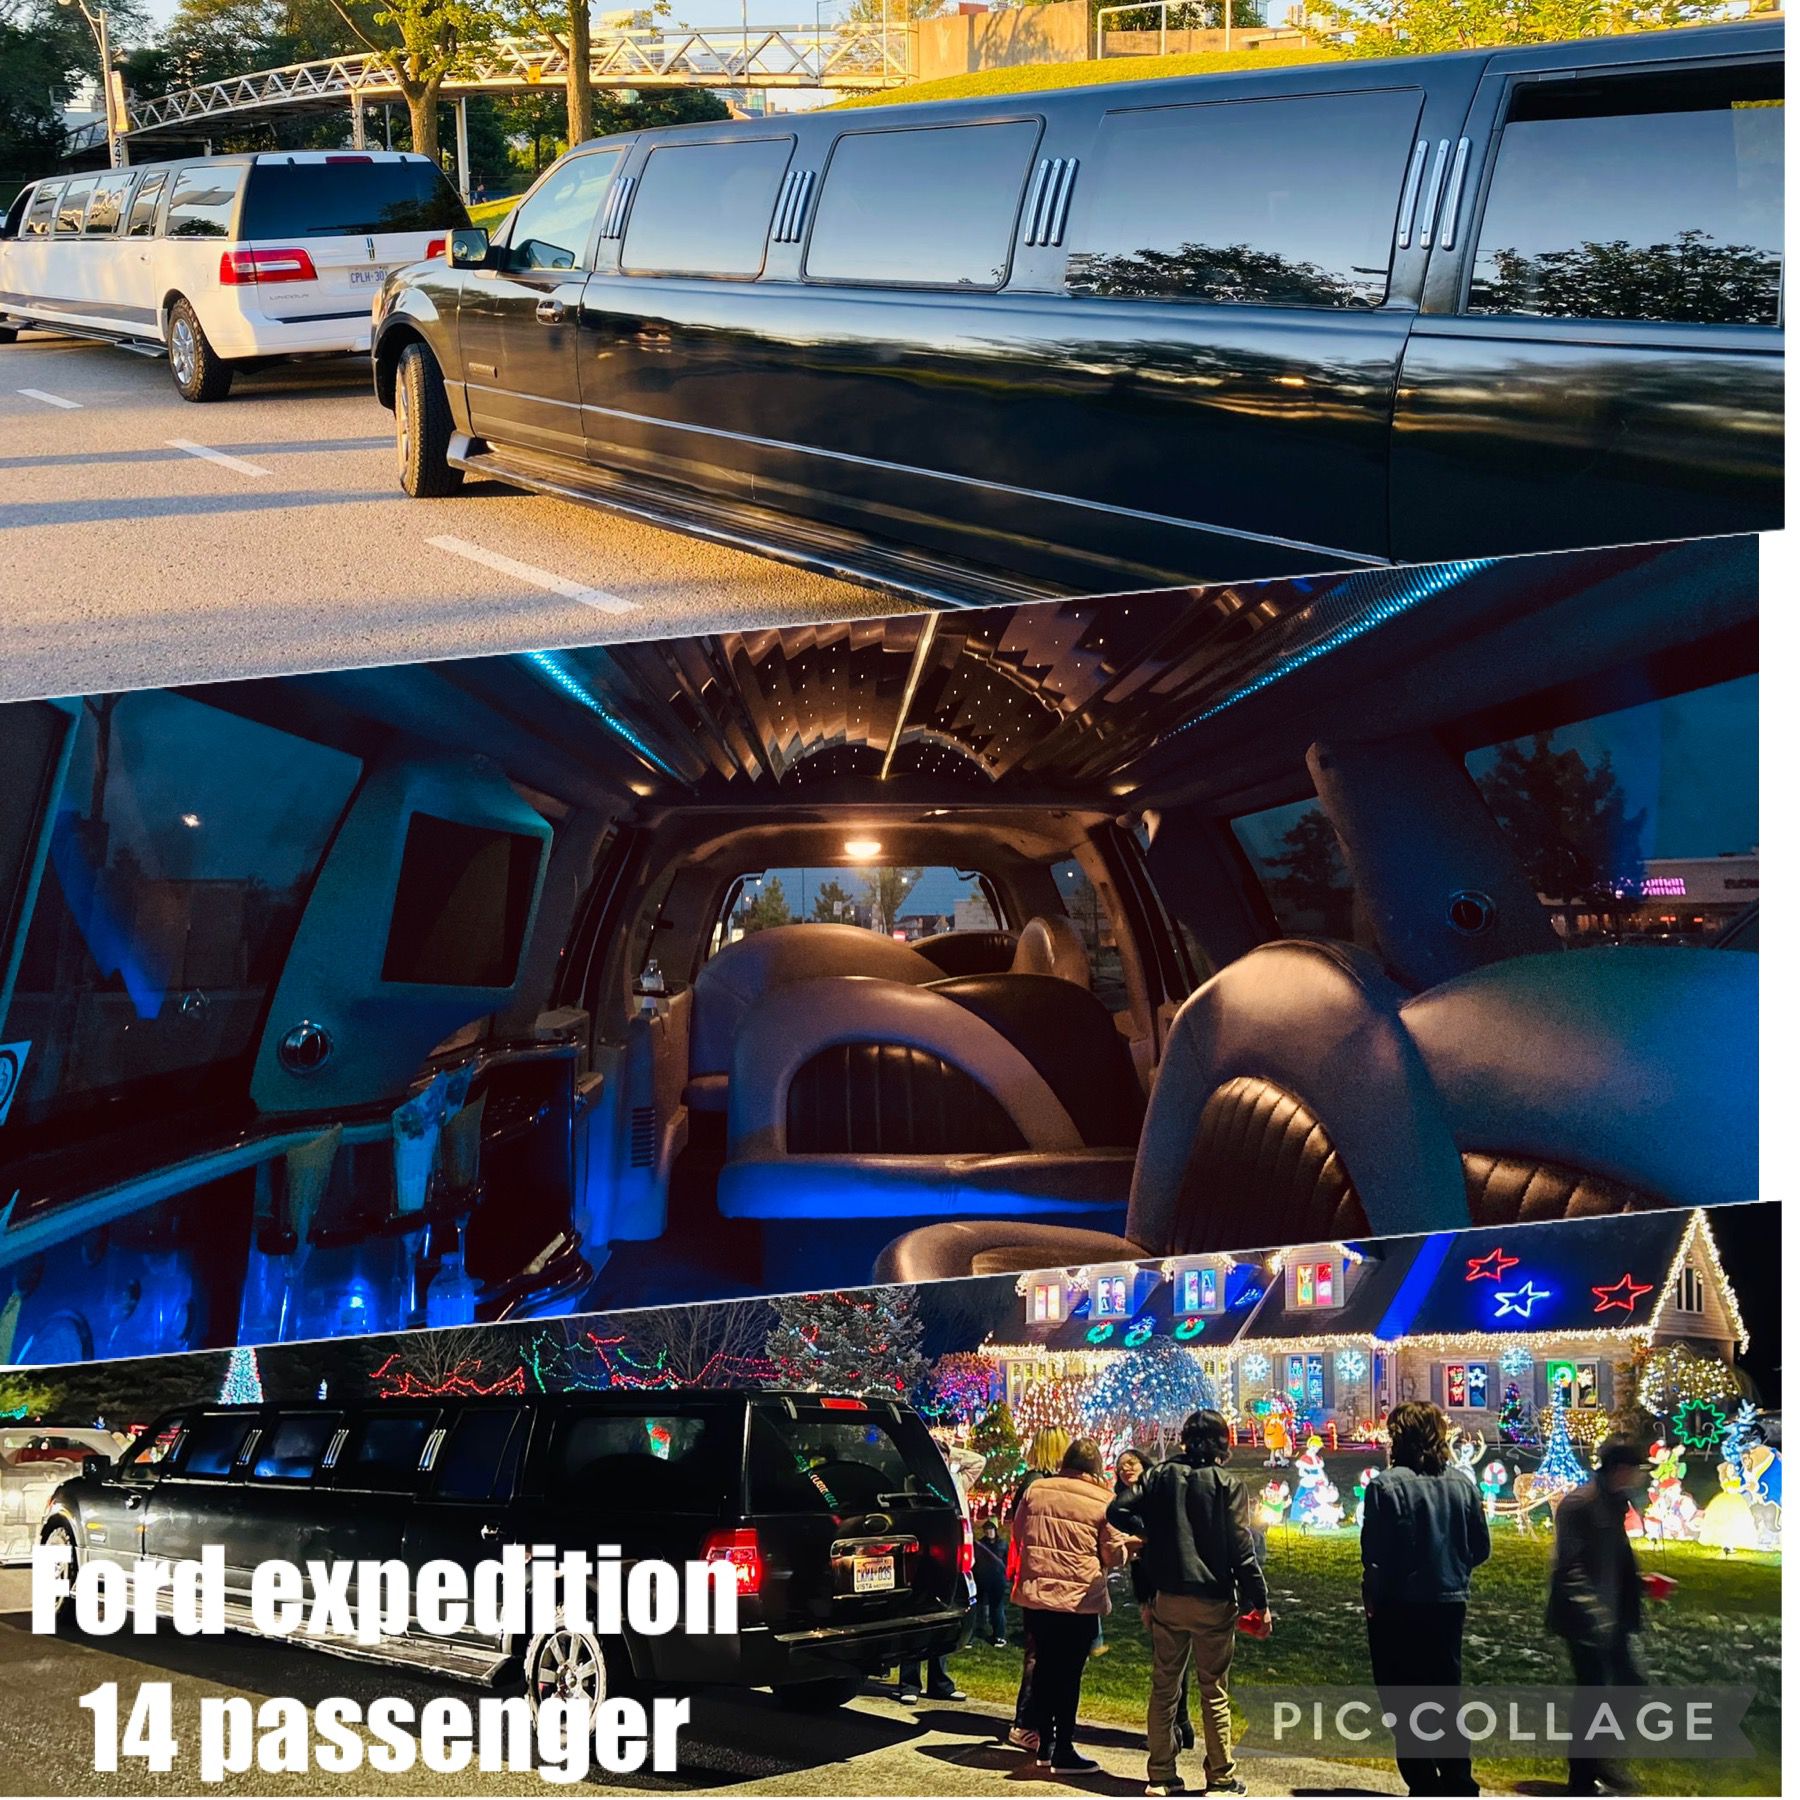 Black ford Expedition SUV Limo